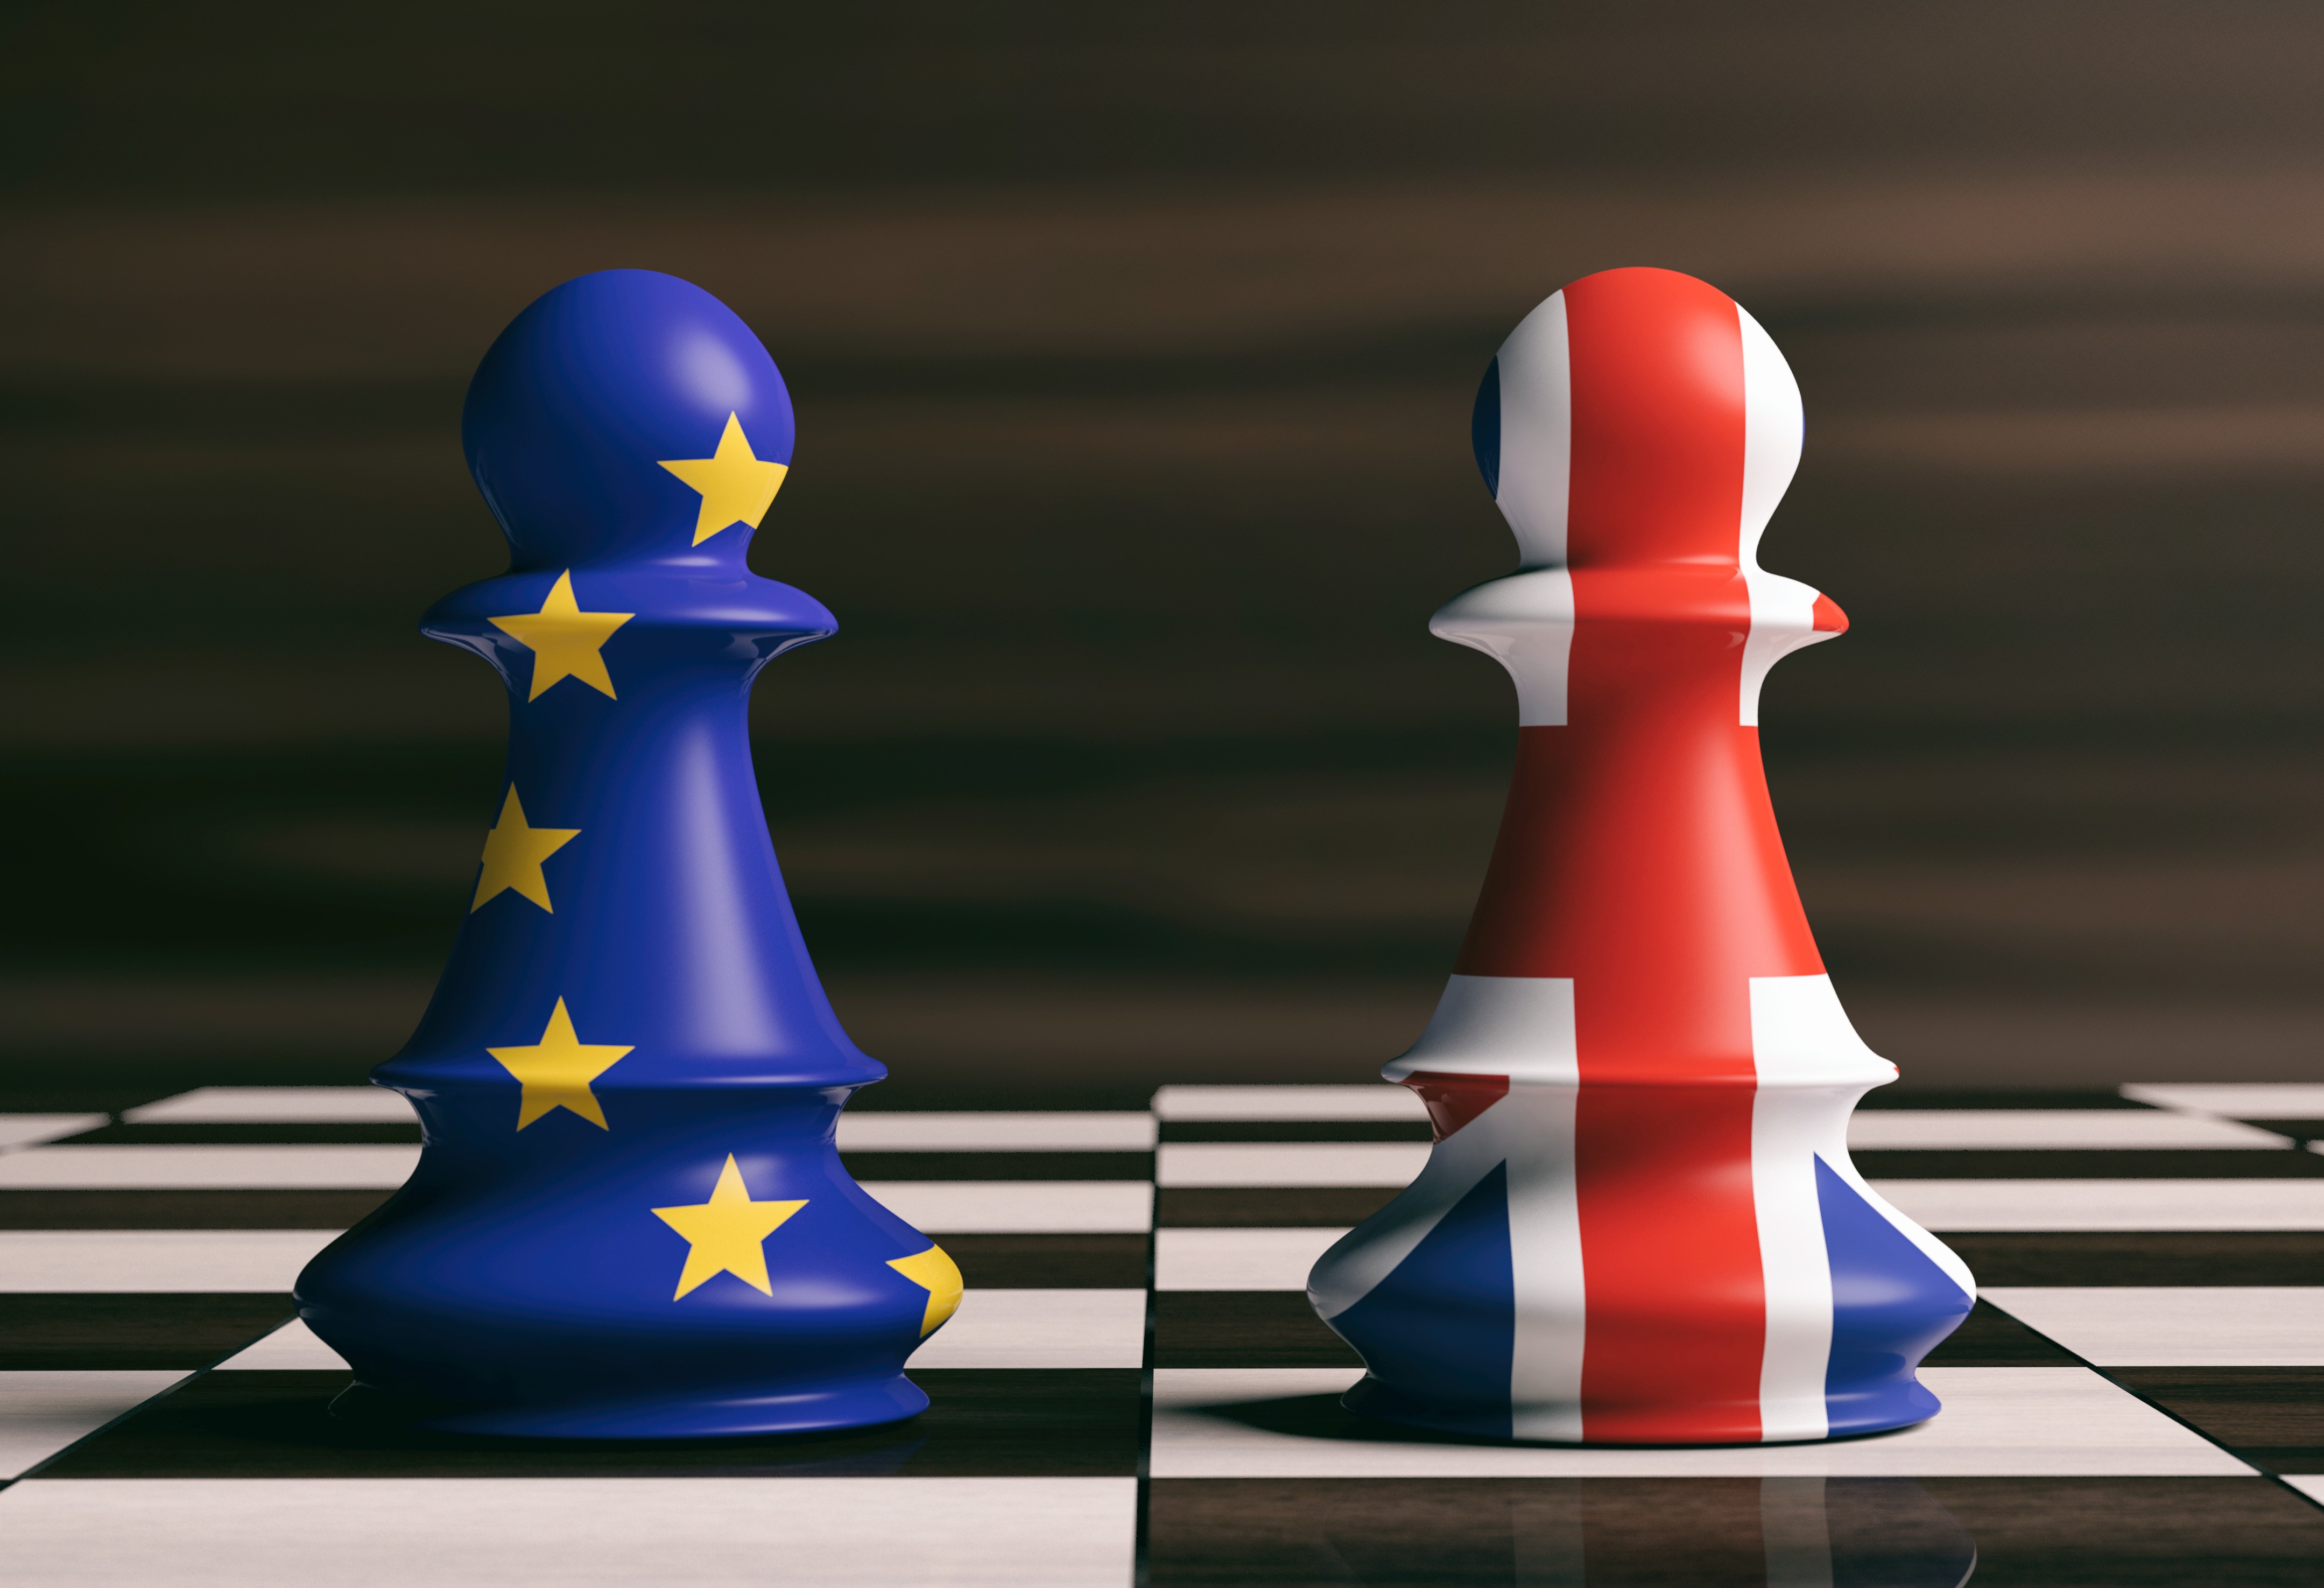 Symbolic image with chess figures representing Great Britain and the European Union